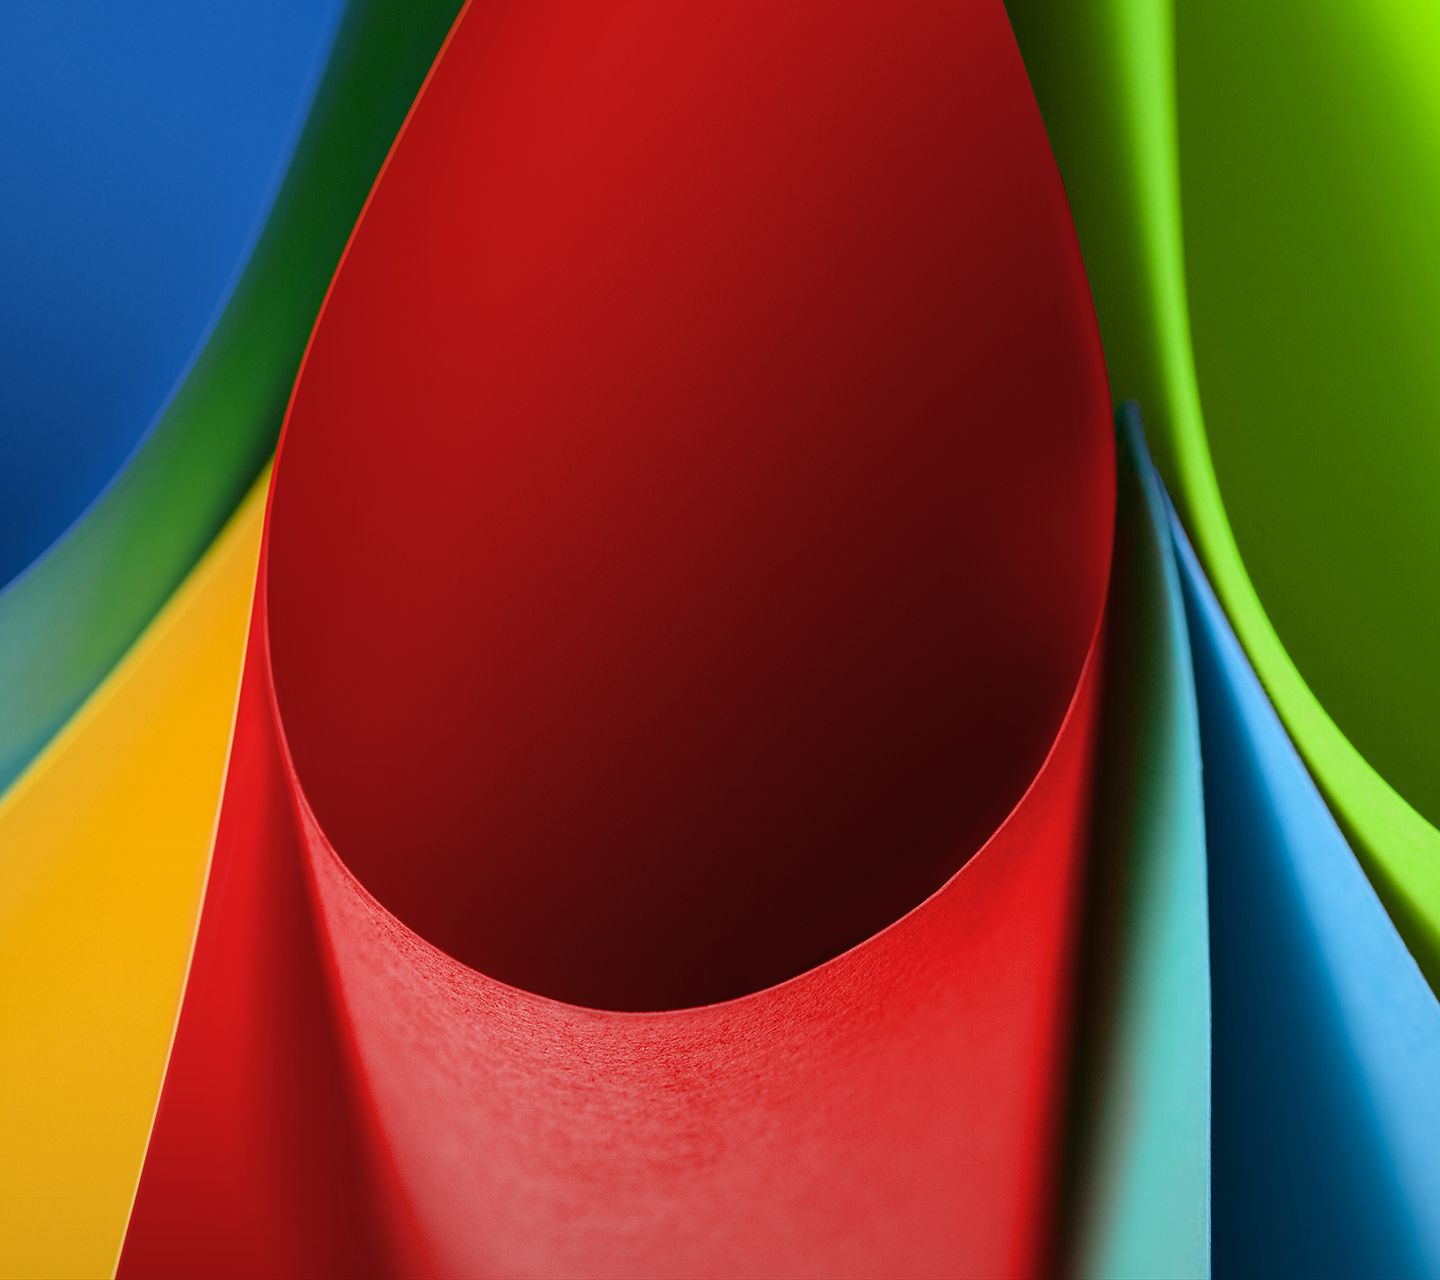 wallpaper for moto g4 plus,green,red,colorfulness,close up,yellow